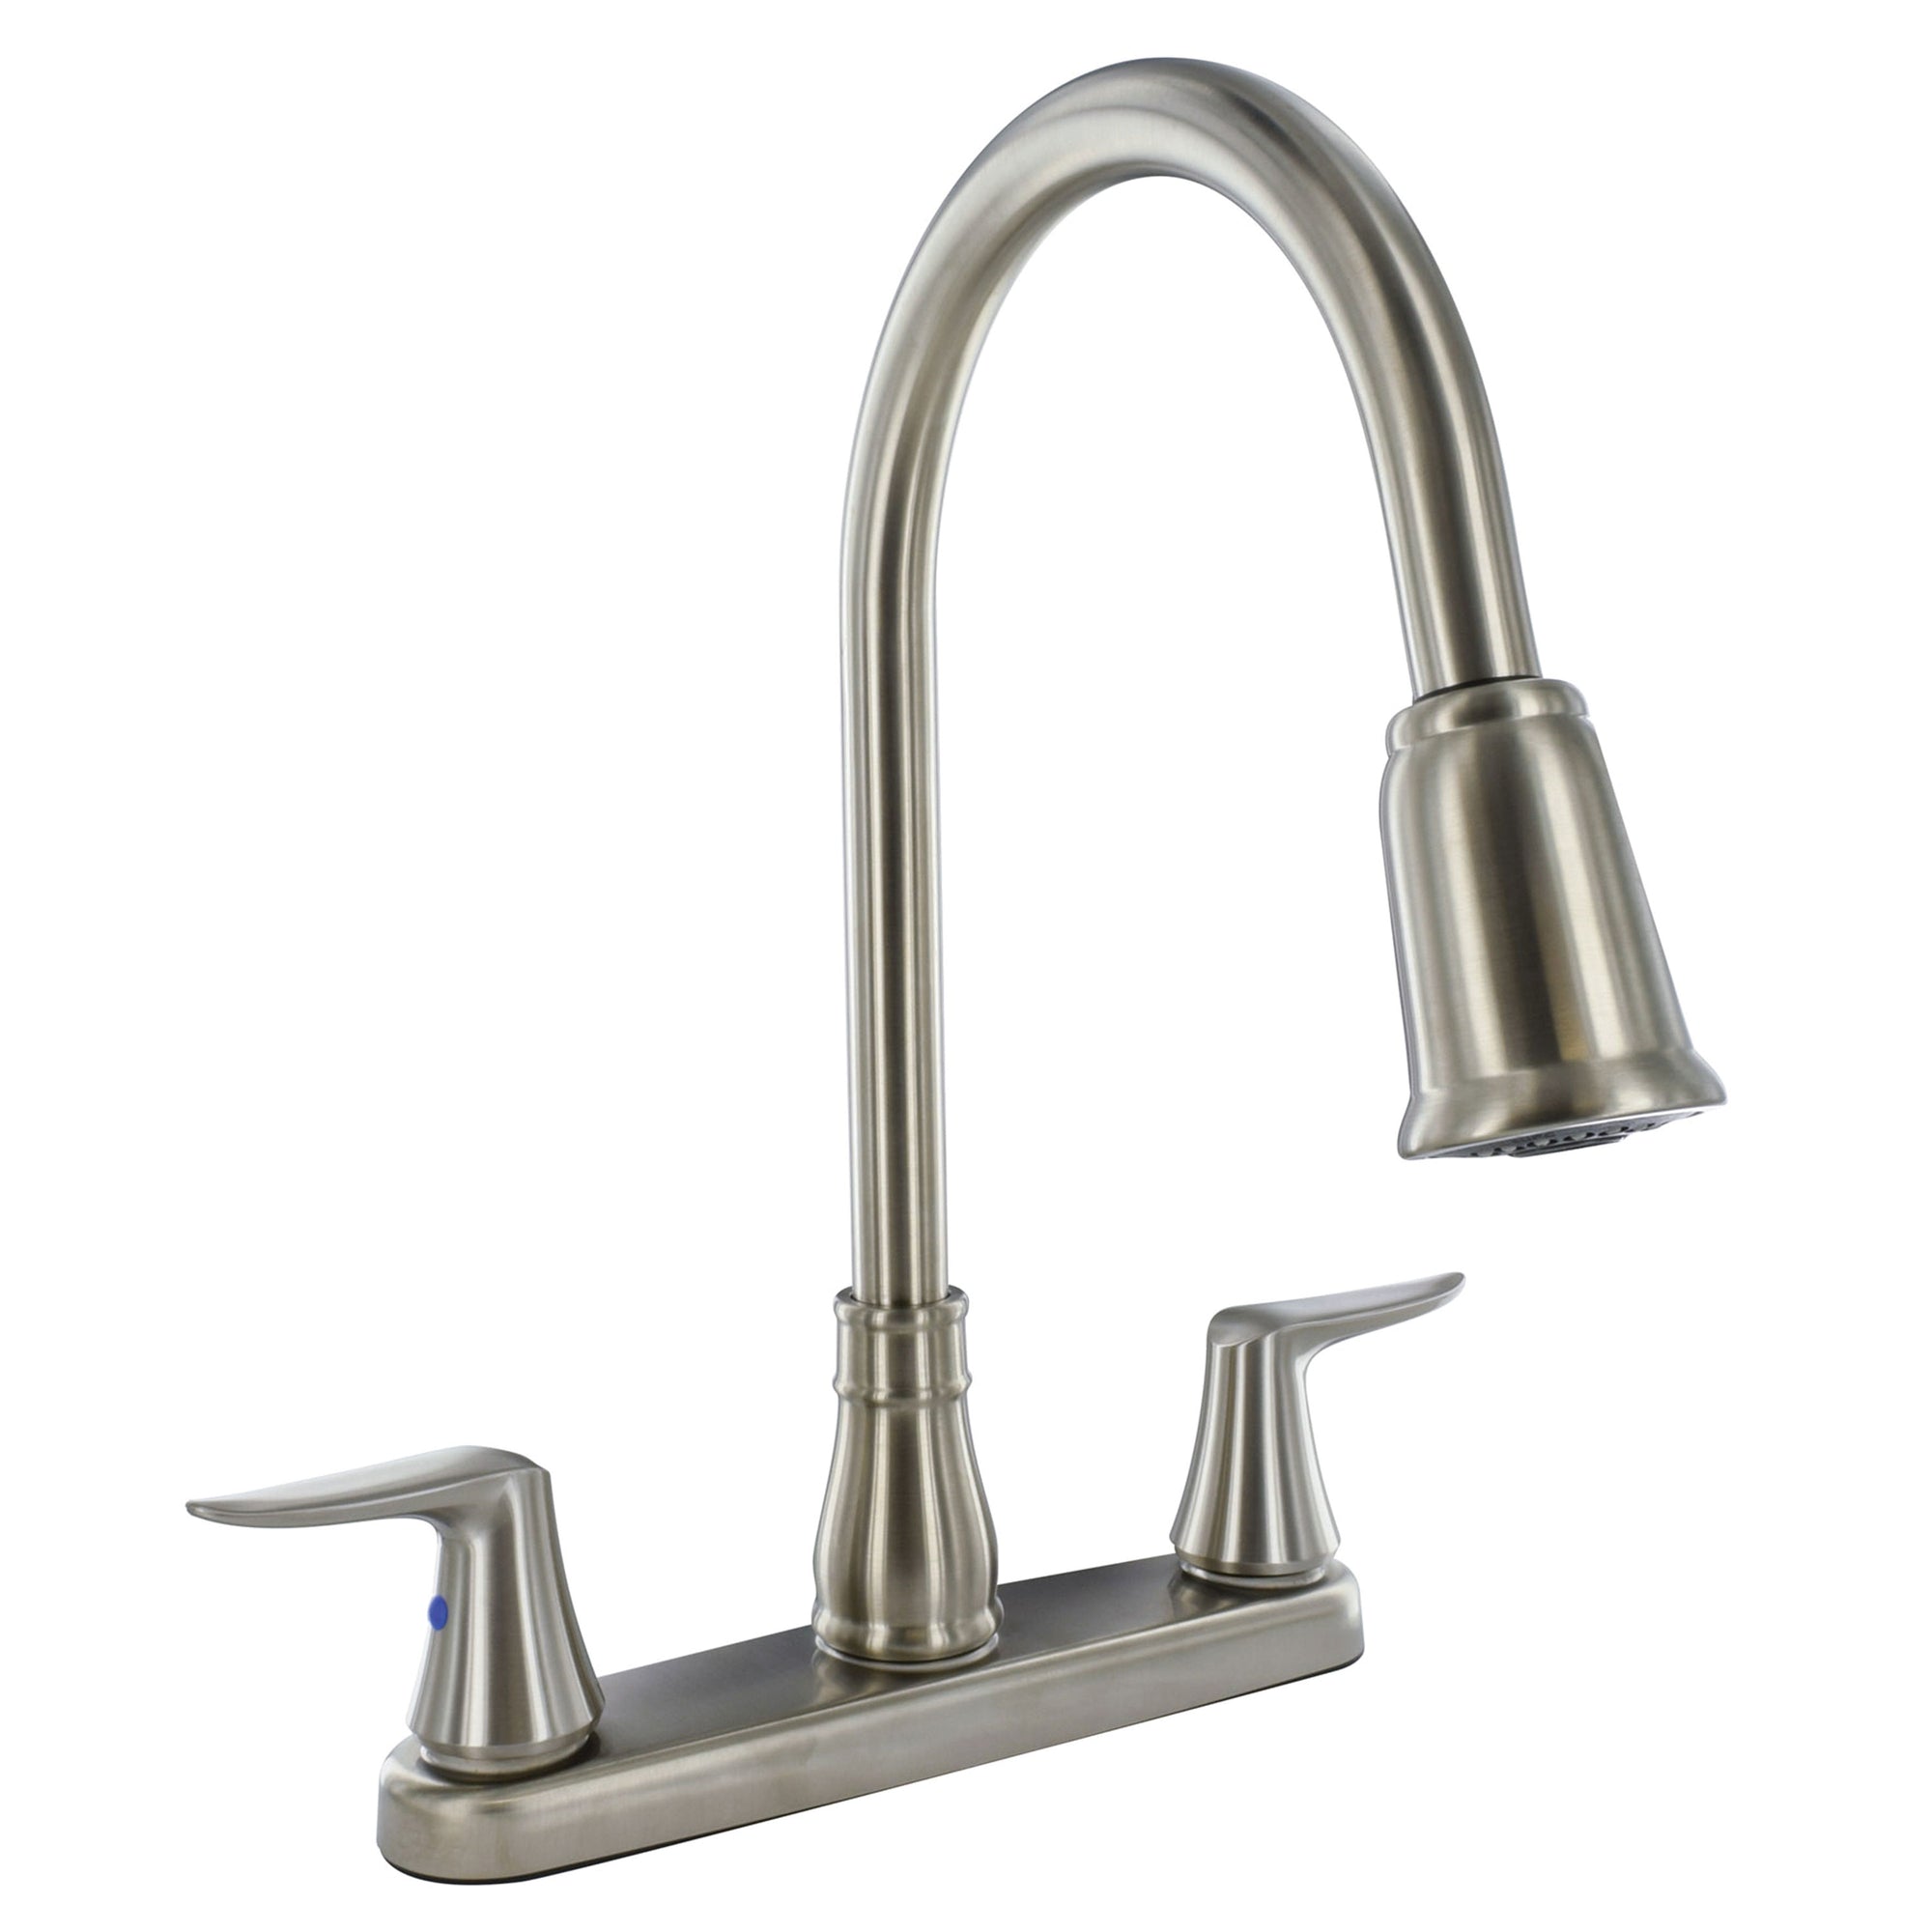 PF221404 Faucet 8" Deck Brushed Nickel Hi-Arc Spout Pull-Down 2-Handle